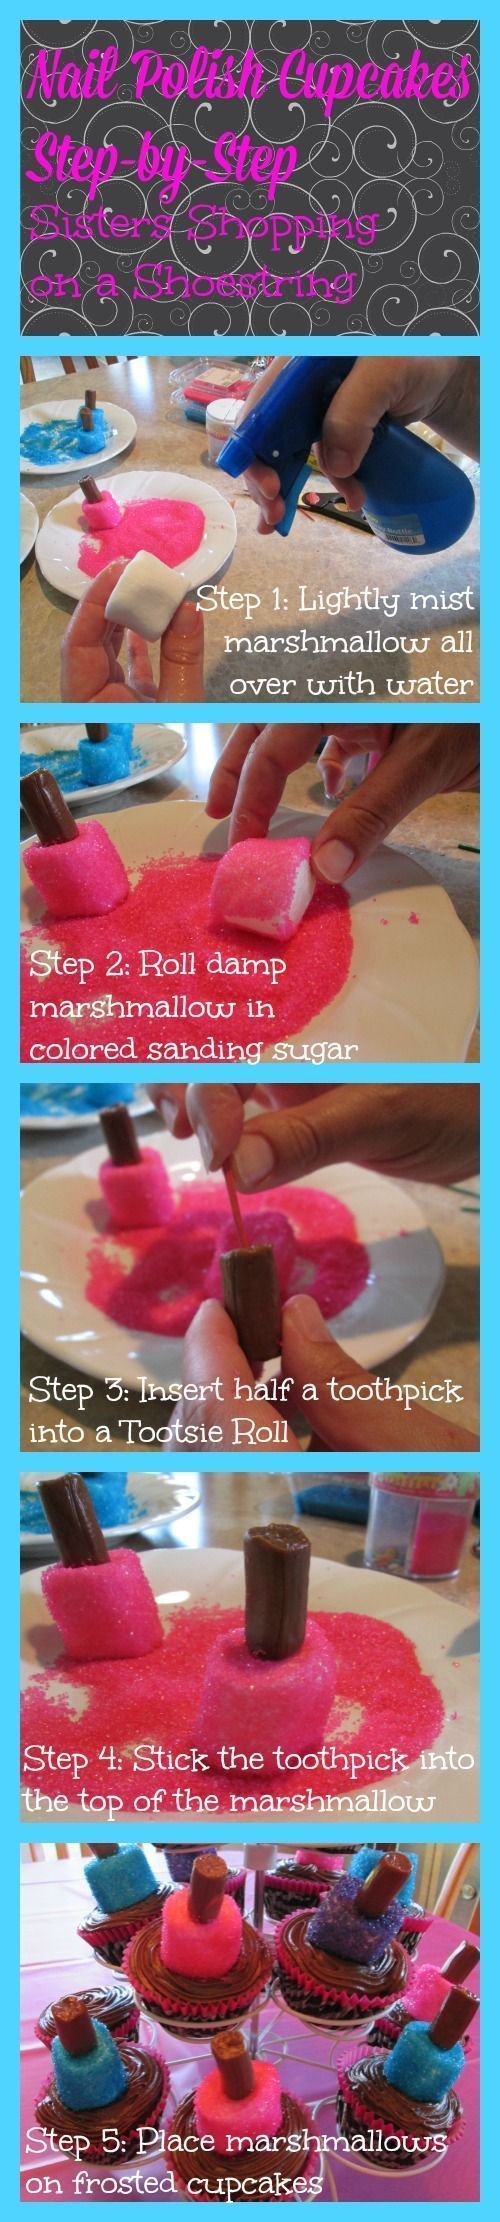 Step-by-Step Spa Sleepover Birthday Party: Marshmallow Nail Polish Cupcakes – Sisters Shopping on a Shoestring